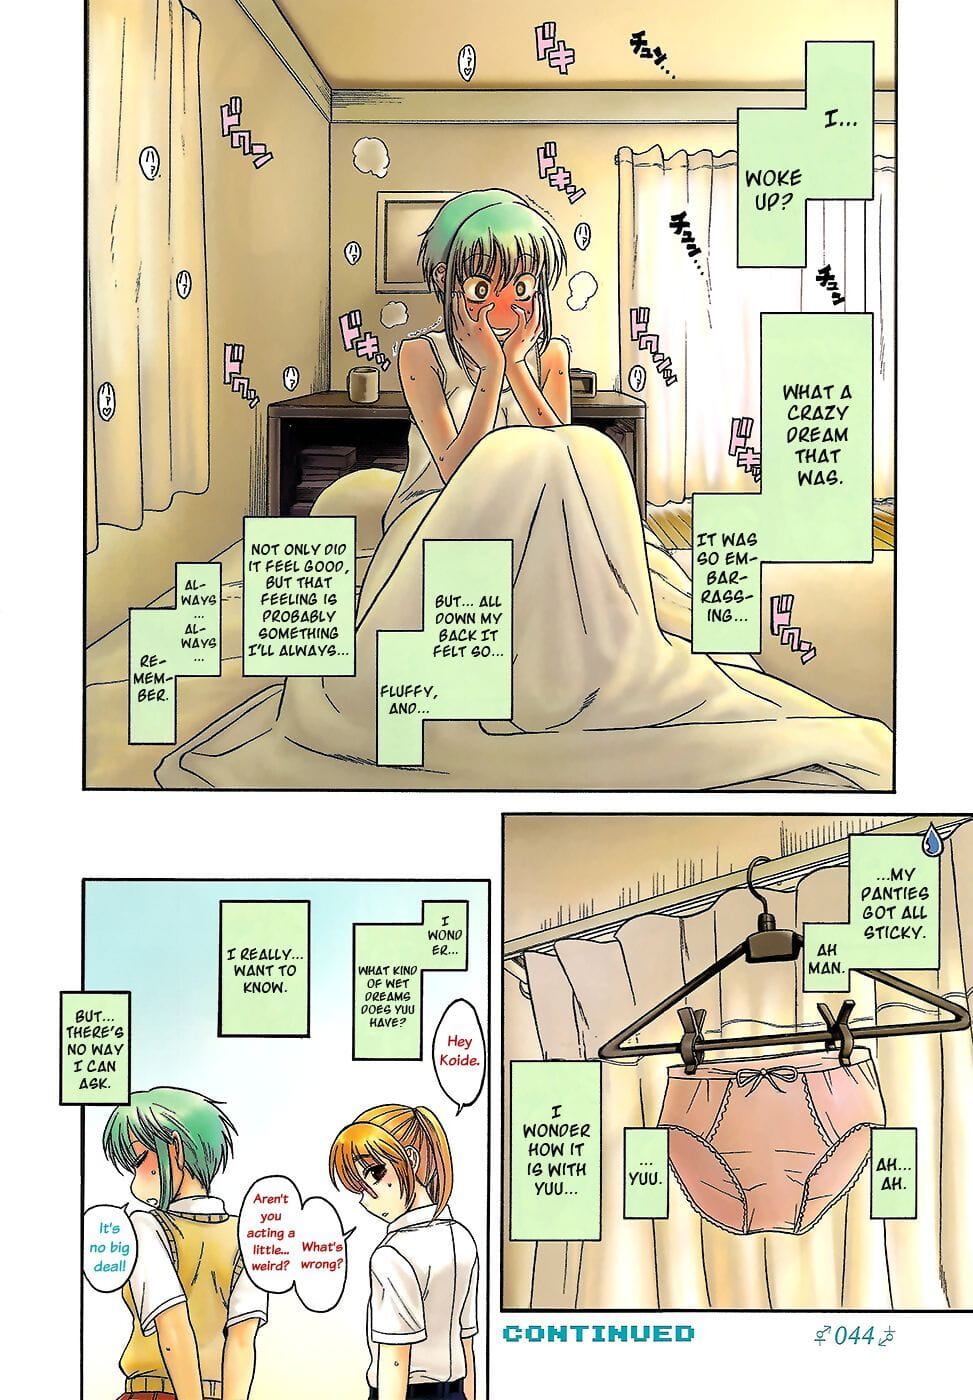 Boy Meets Girl- Girl Meets Boy Chapter 3 page 1